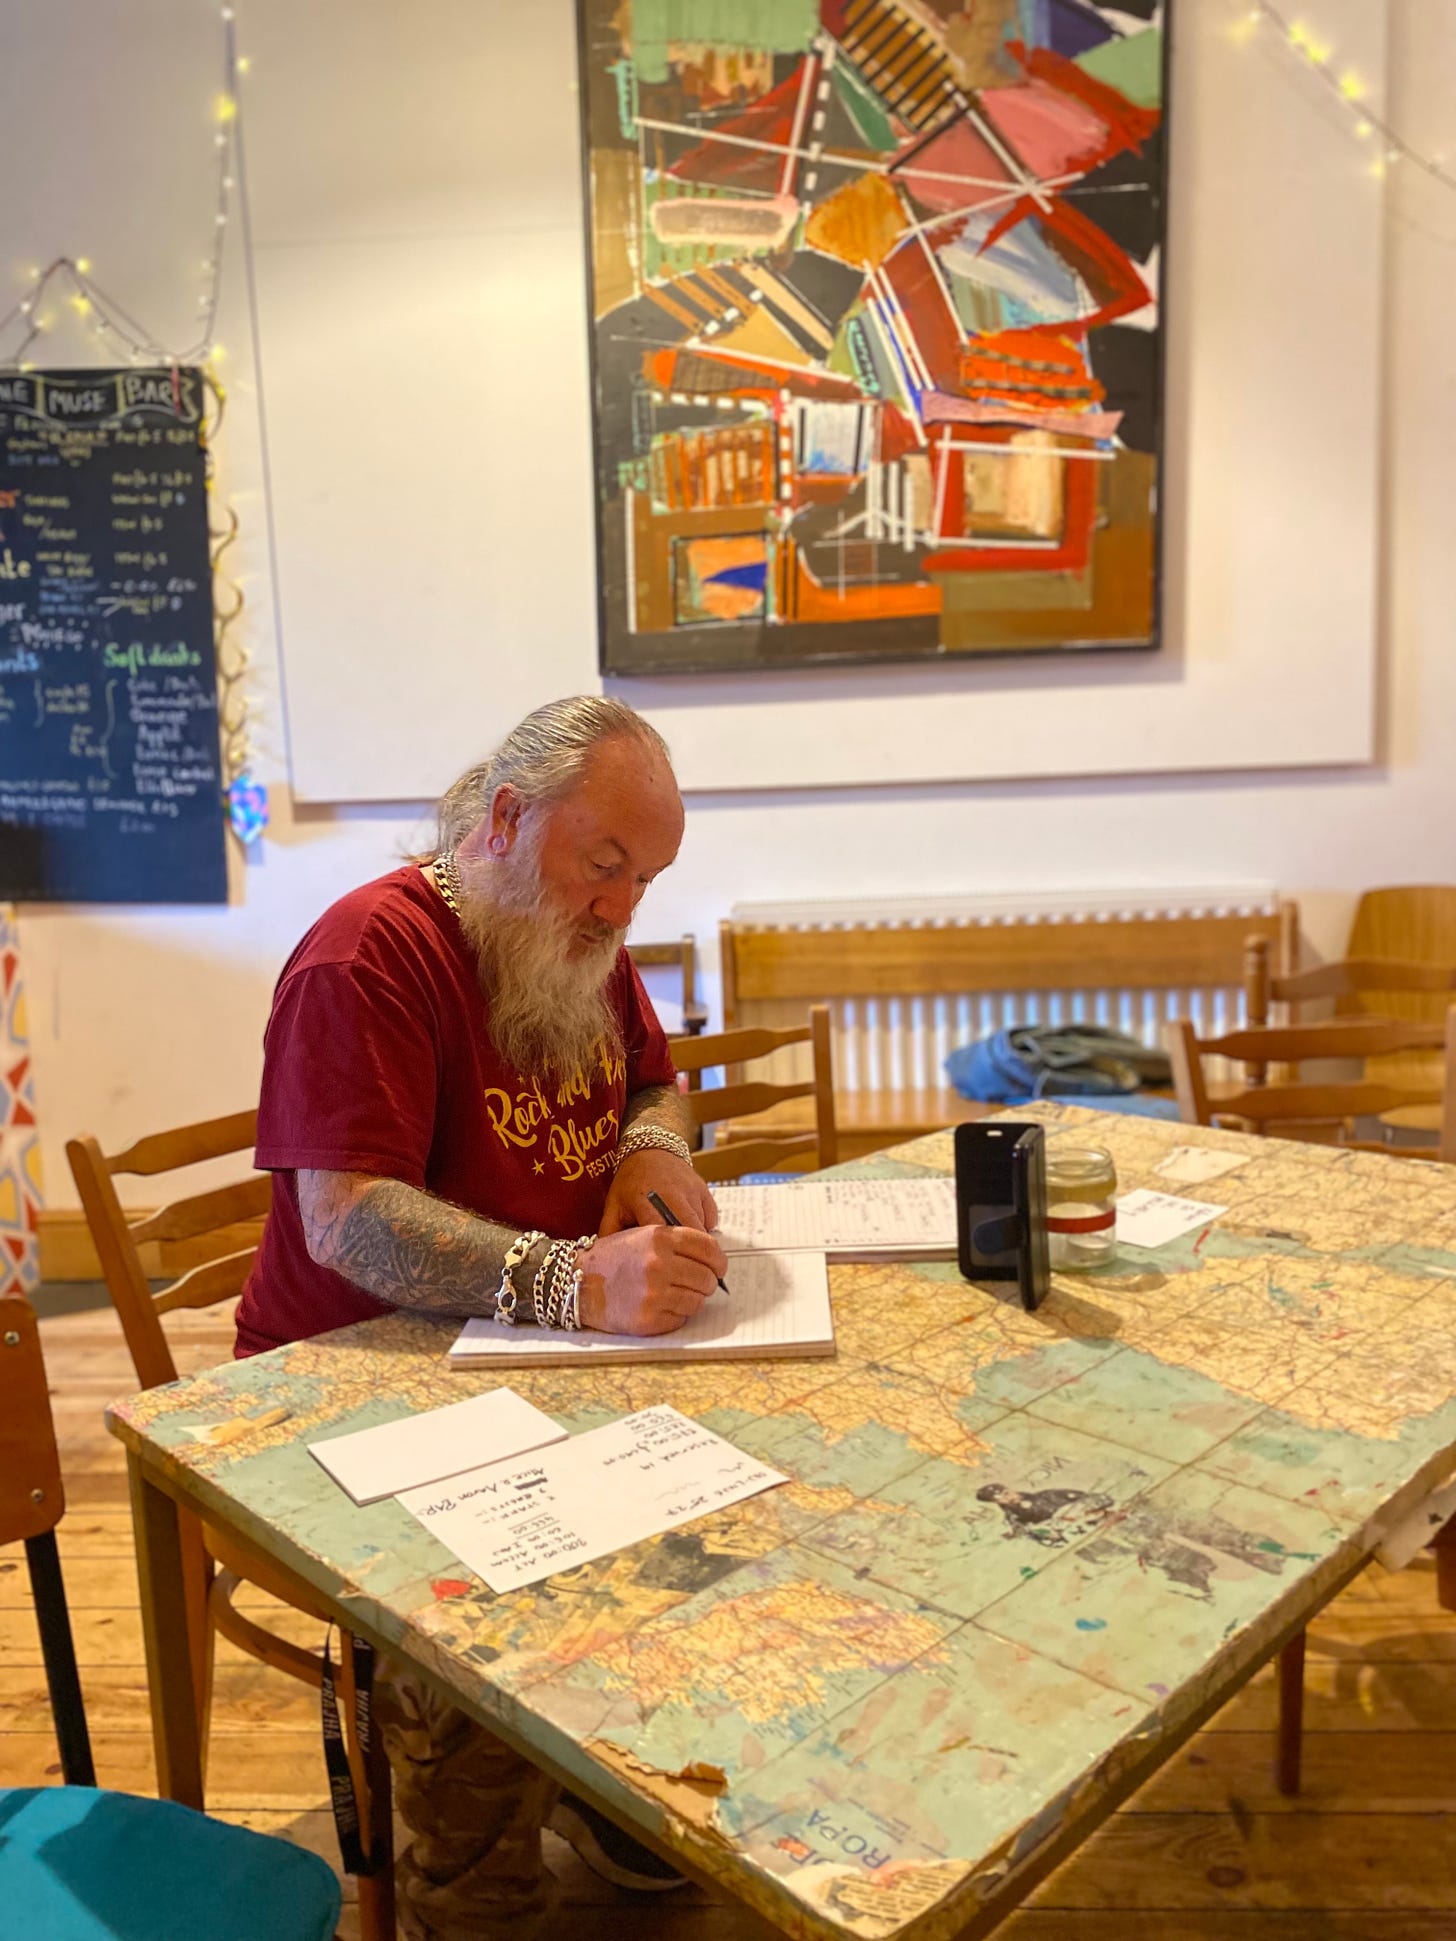 Man with beard sat at table writing. He has tattoos on his arm and wearing silver chains on his wrists. Painting on the wall in the background